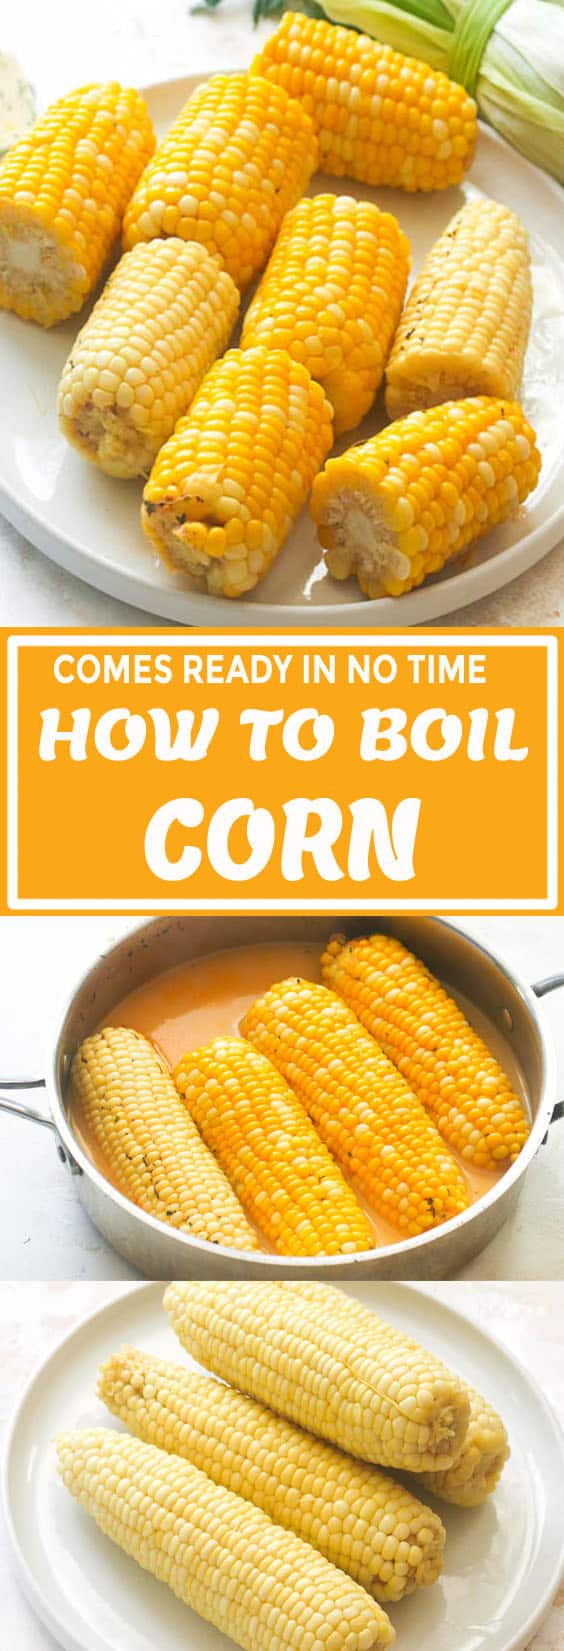 How To Boil Corn